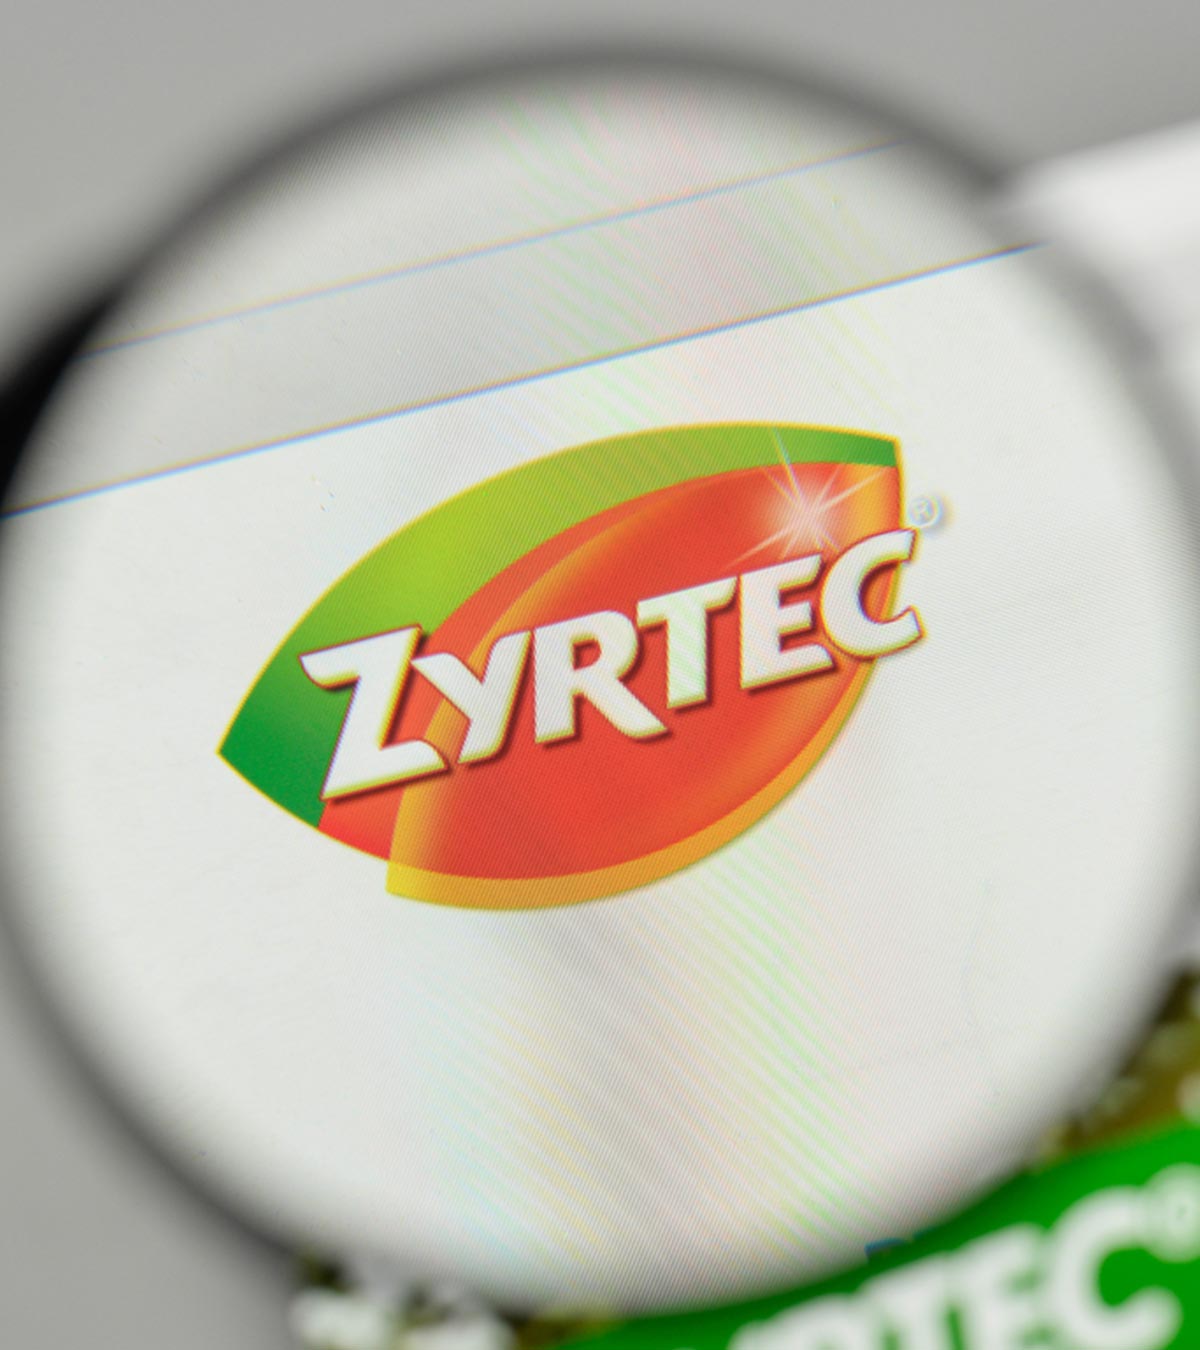 Zyrtec For Kids: Dosage, Uses And Side Effects To Consider